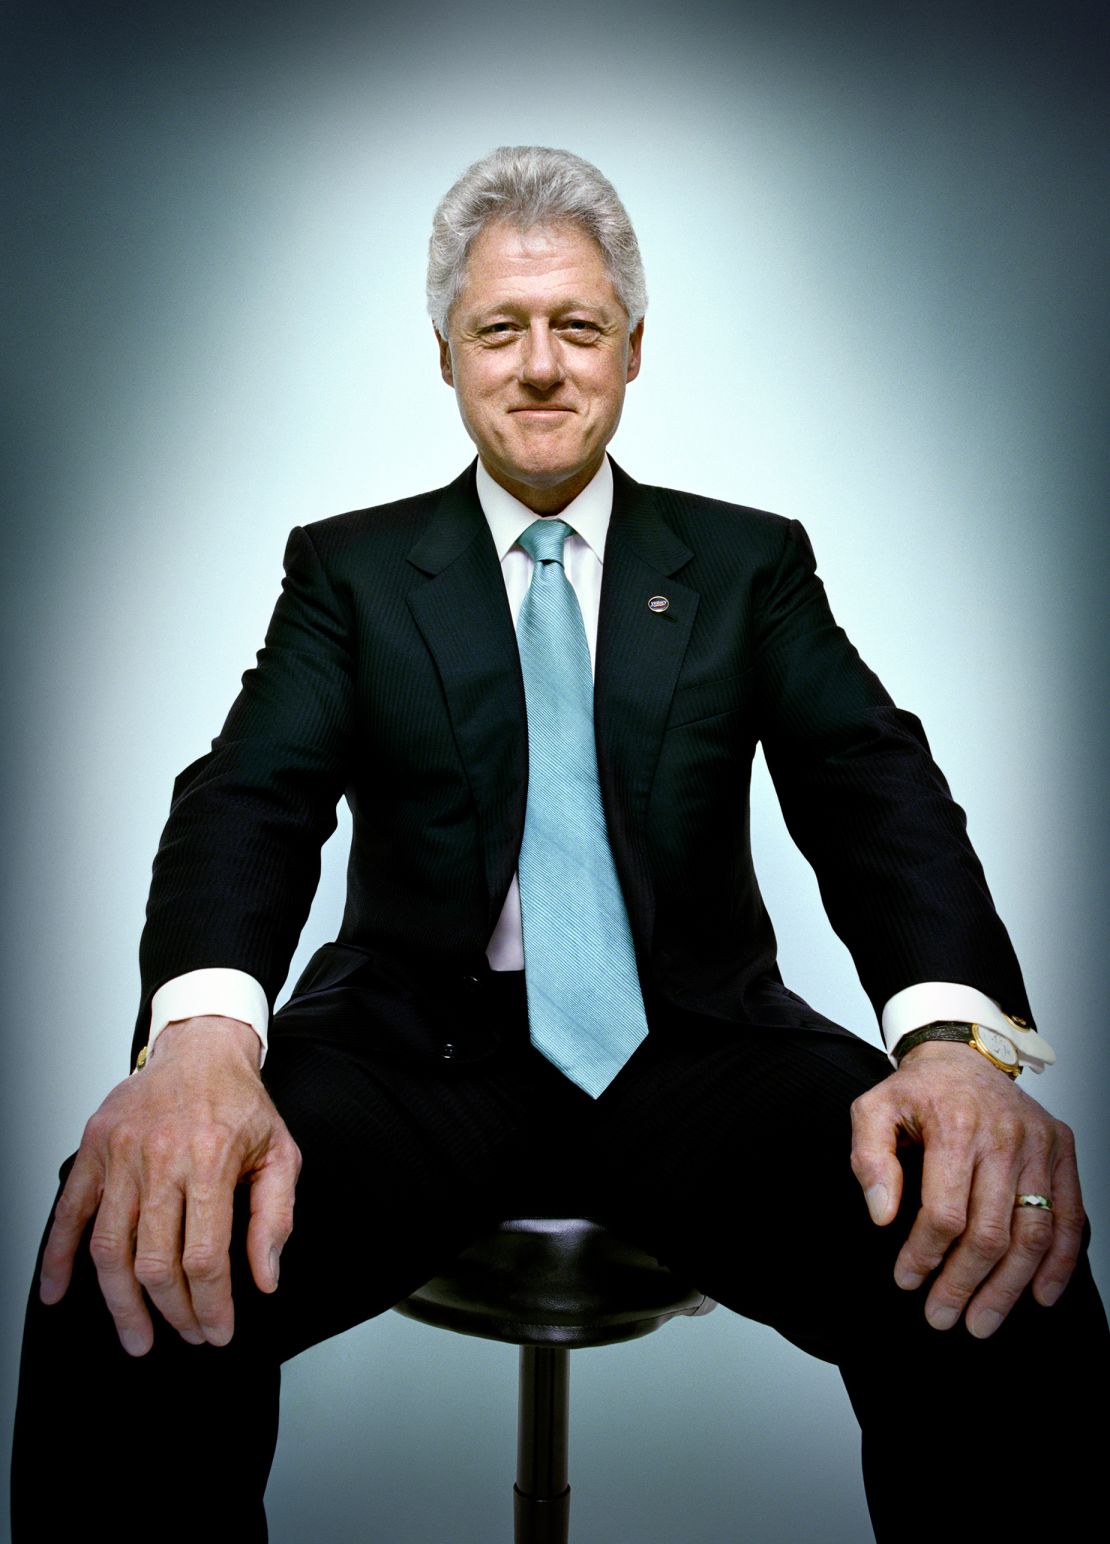 "We look at (the photo) of Clinton through a different lens now," says Platon of his 2000 portrait.